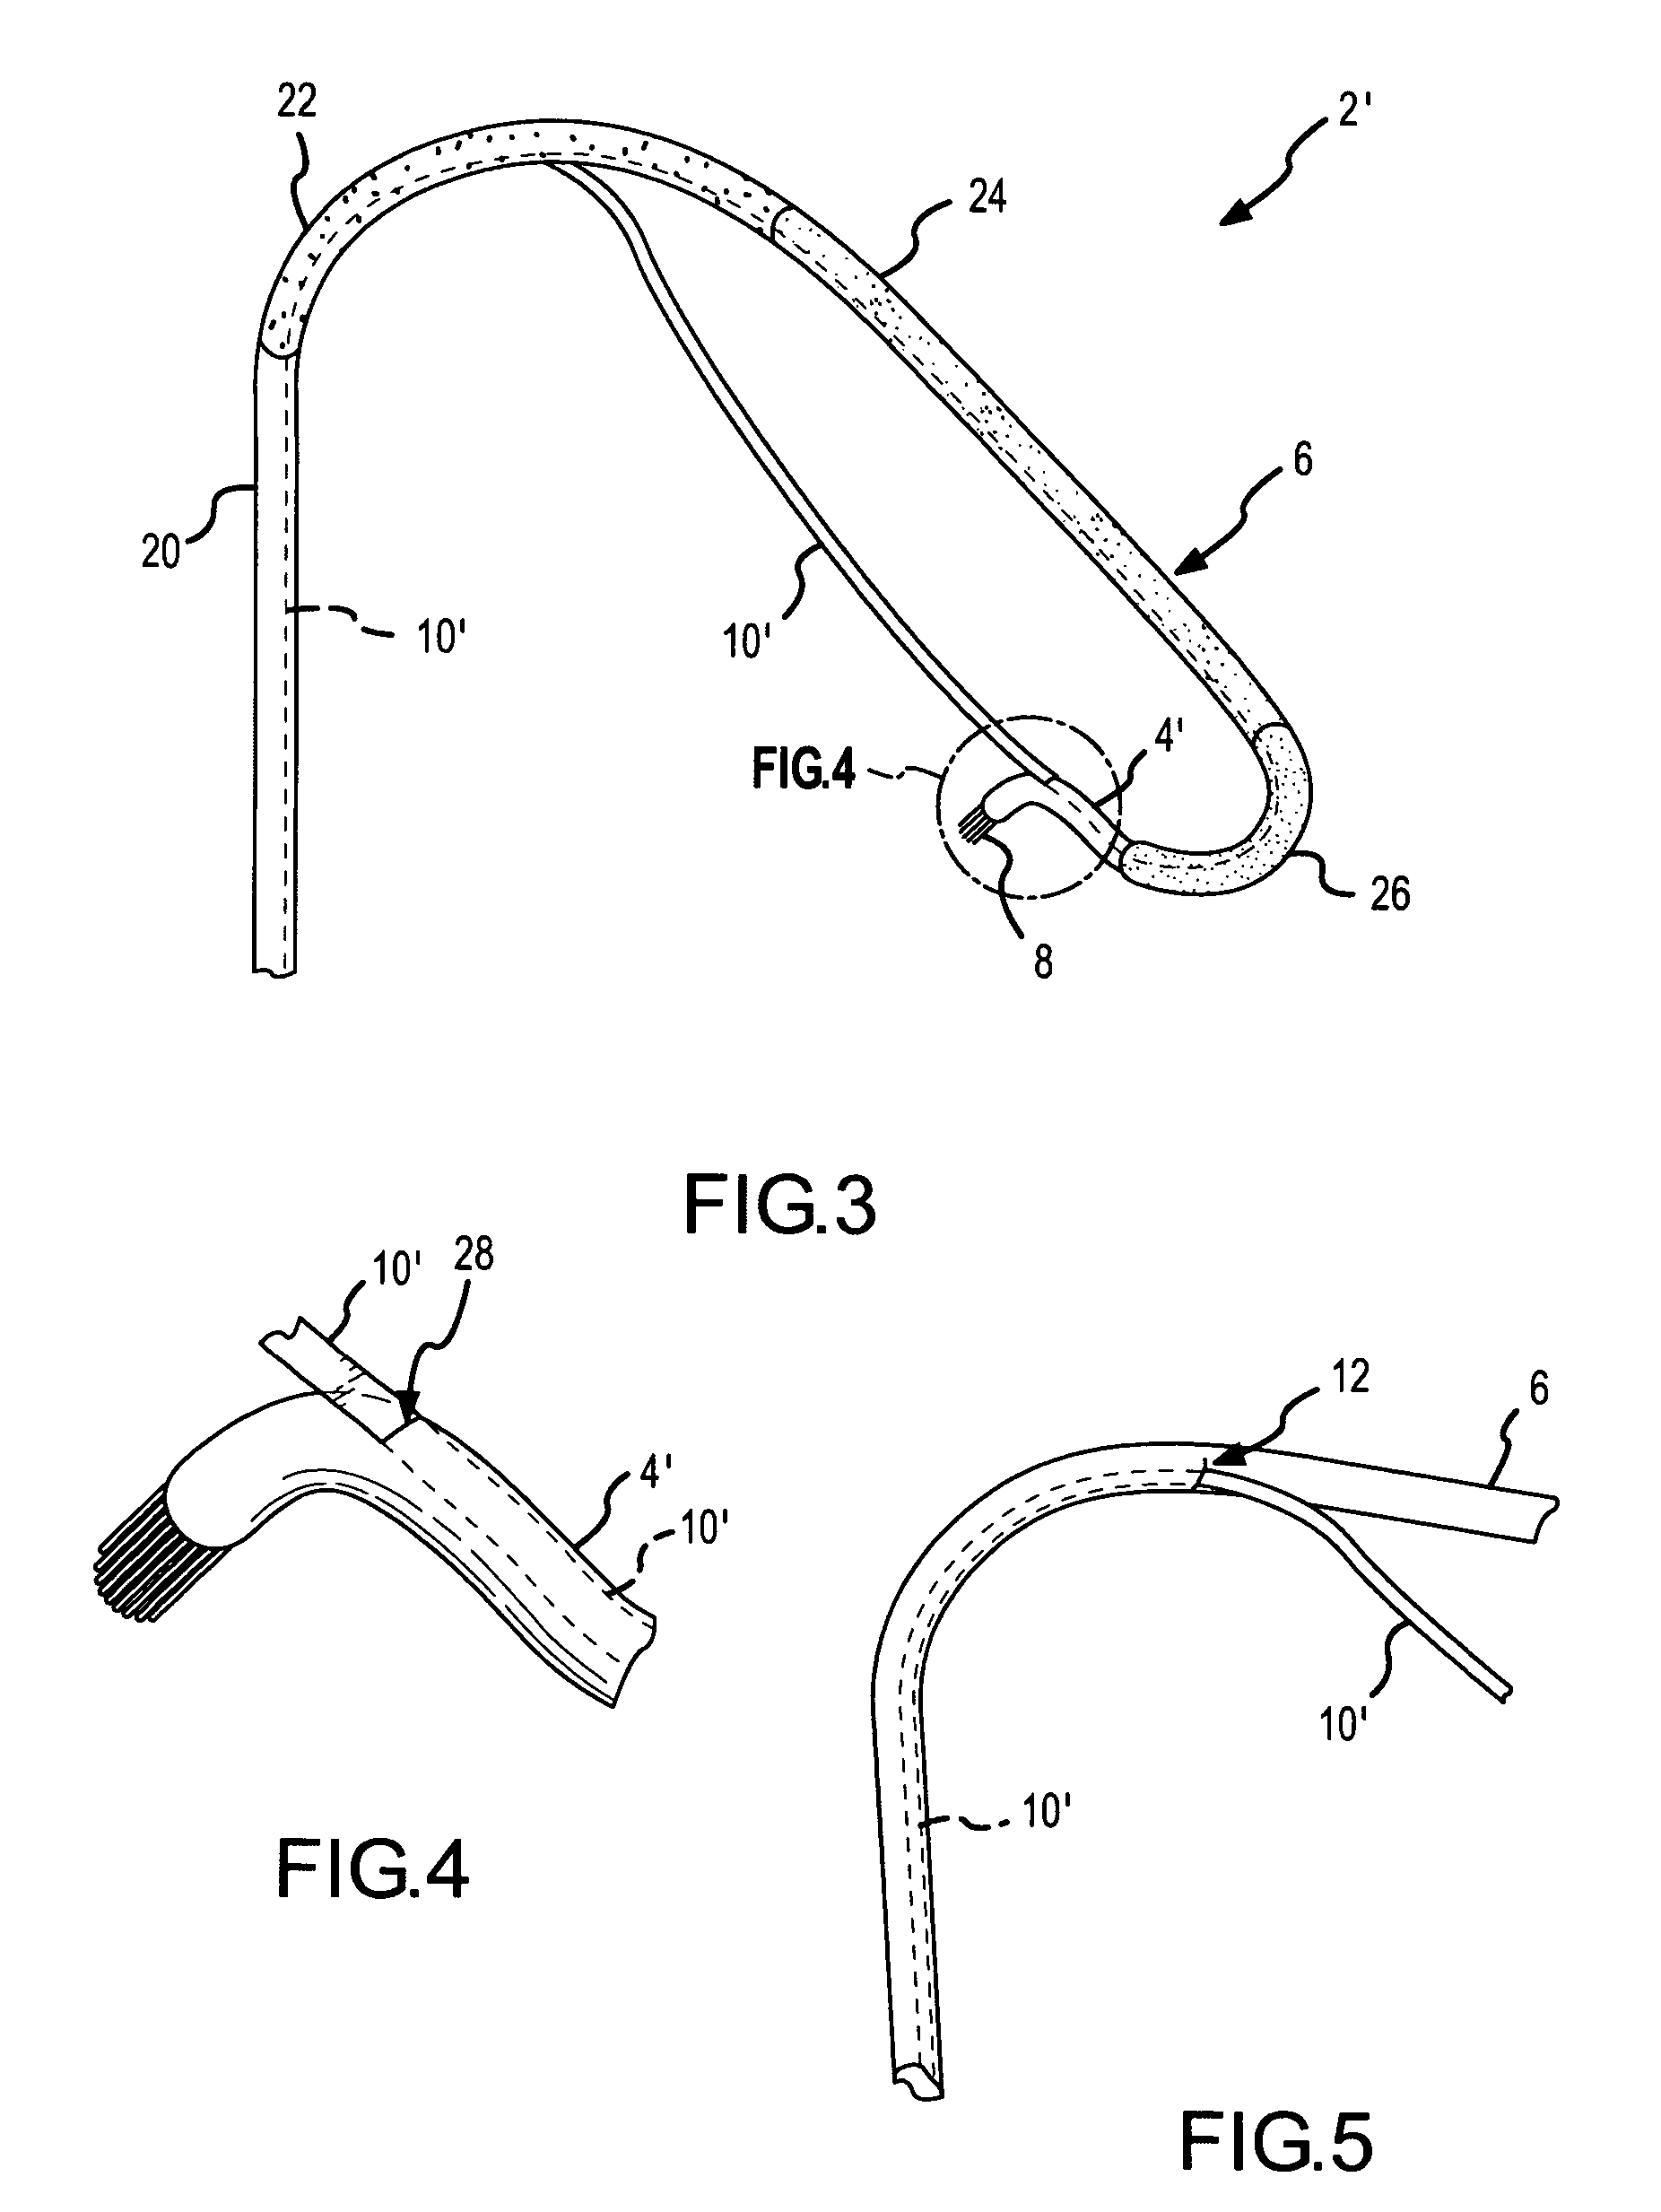 Catheter electrode and rail system for cardiac ablation